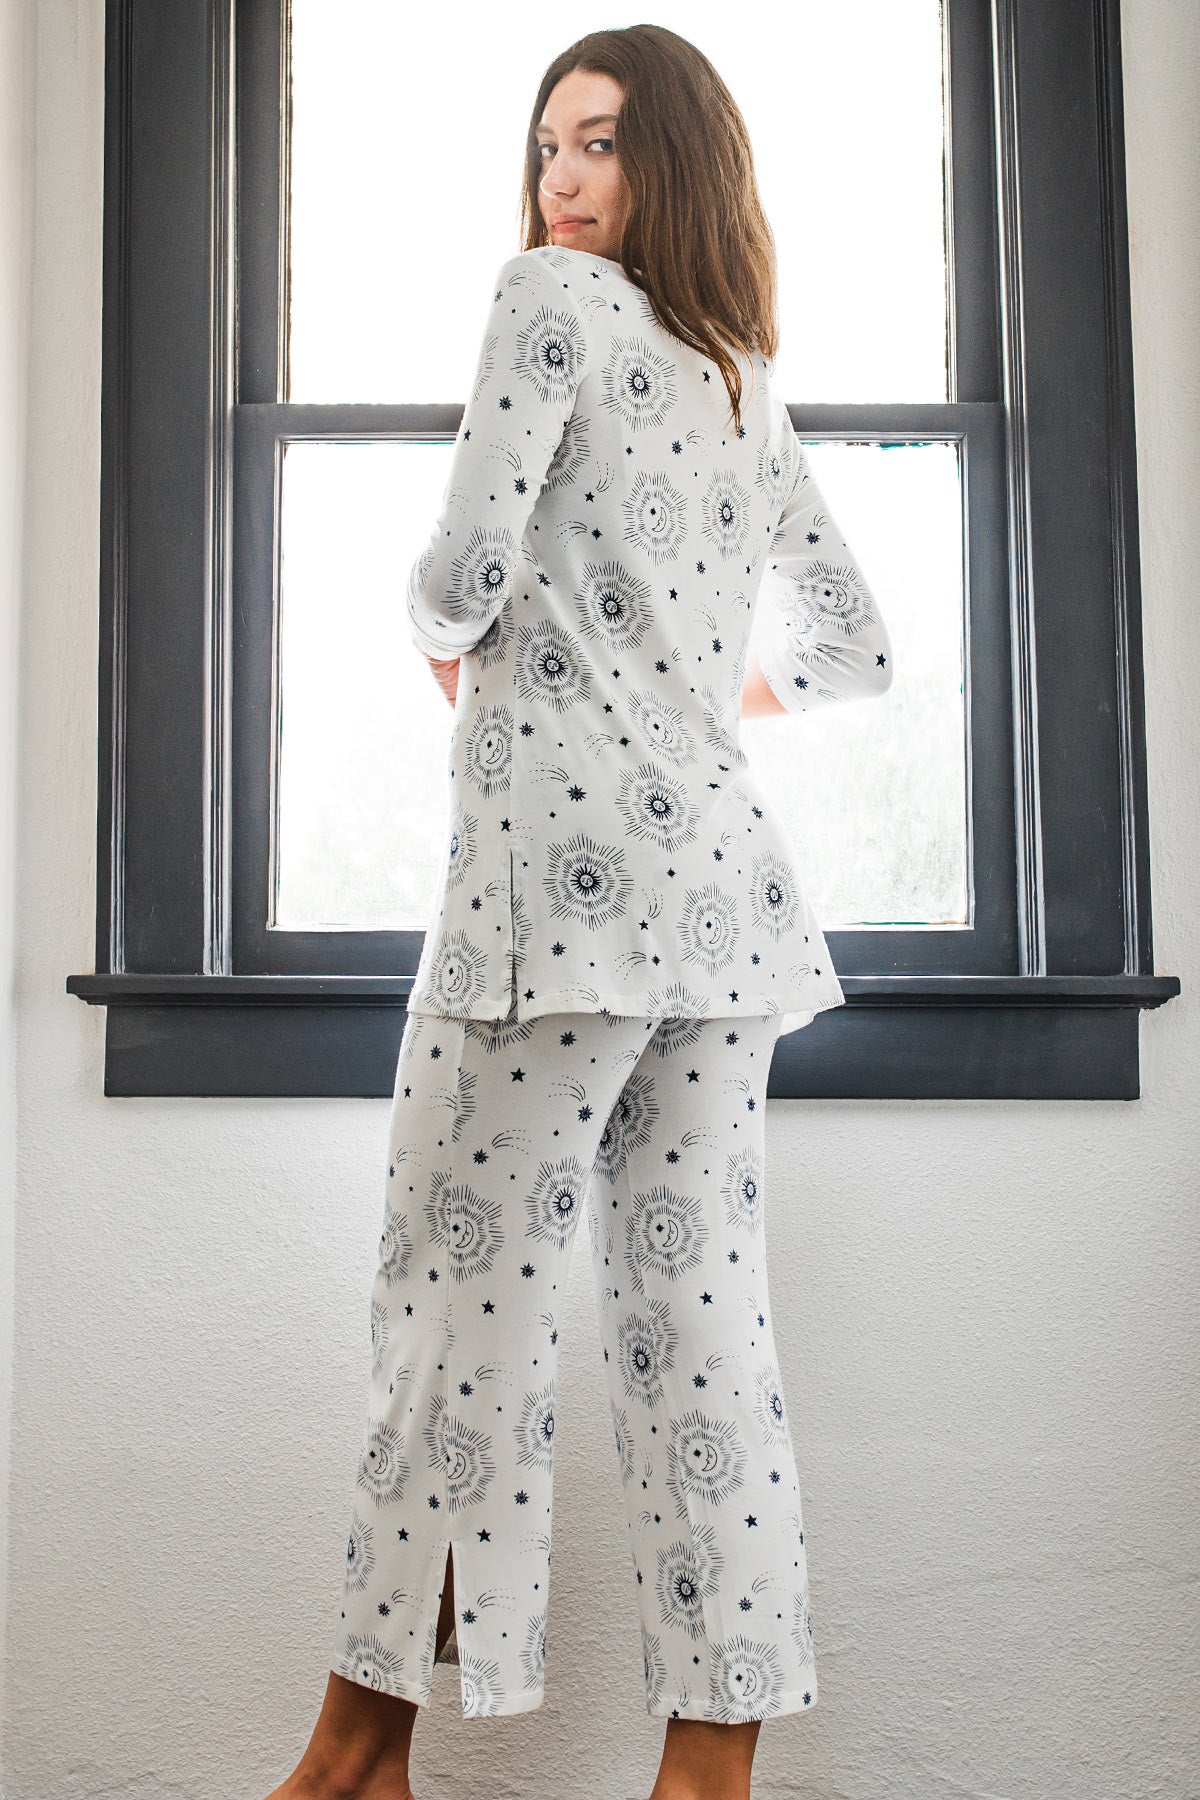 Most elegant and stylish pajama set options are waiting for you! #penti  #pentijo #newcollection #pajamasuit #ammanjo